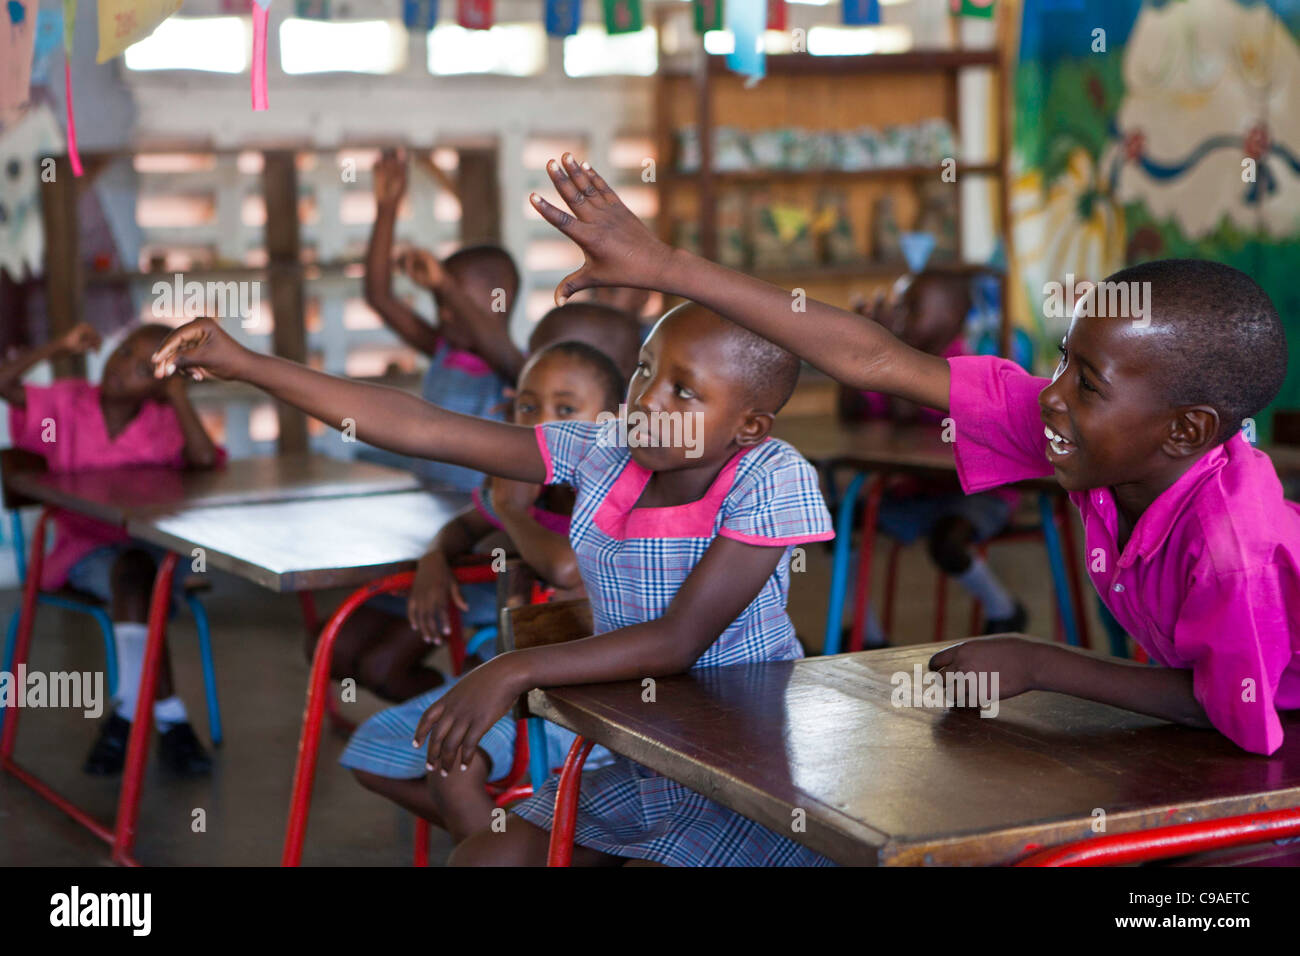 Children attend the kindergarten school learn to read and write at the Wema Centre, Mombassa, Kenya. Stock Photo